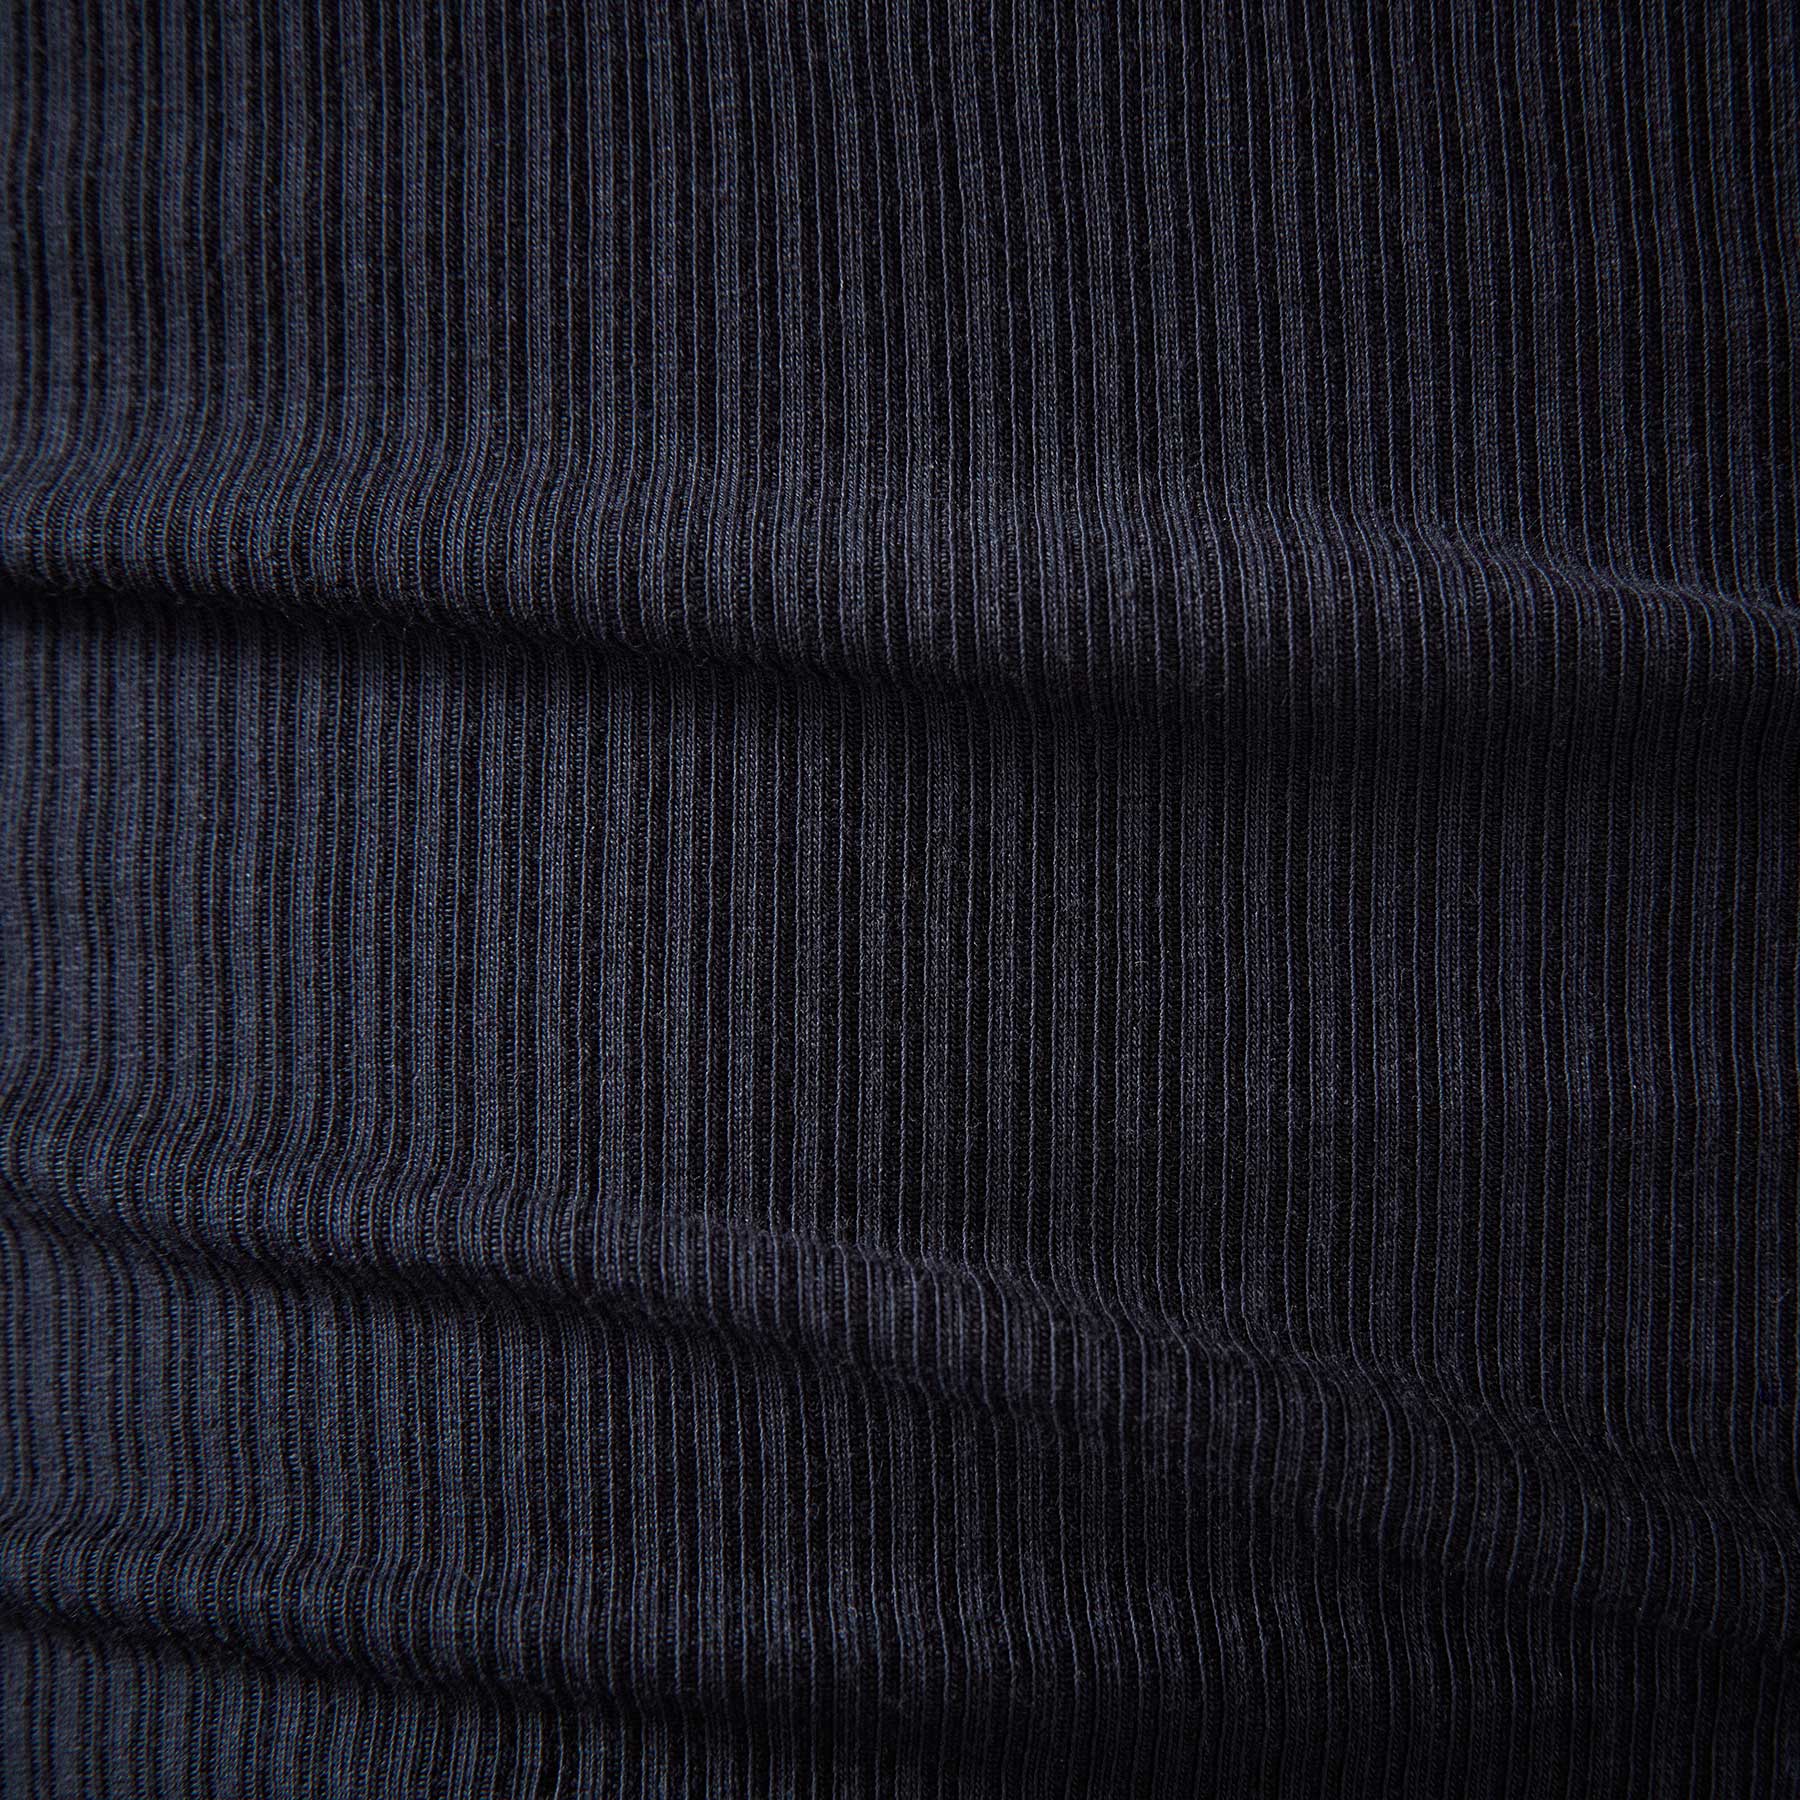 Ribbed Daily Tank - Carbon Pigment